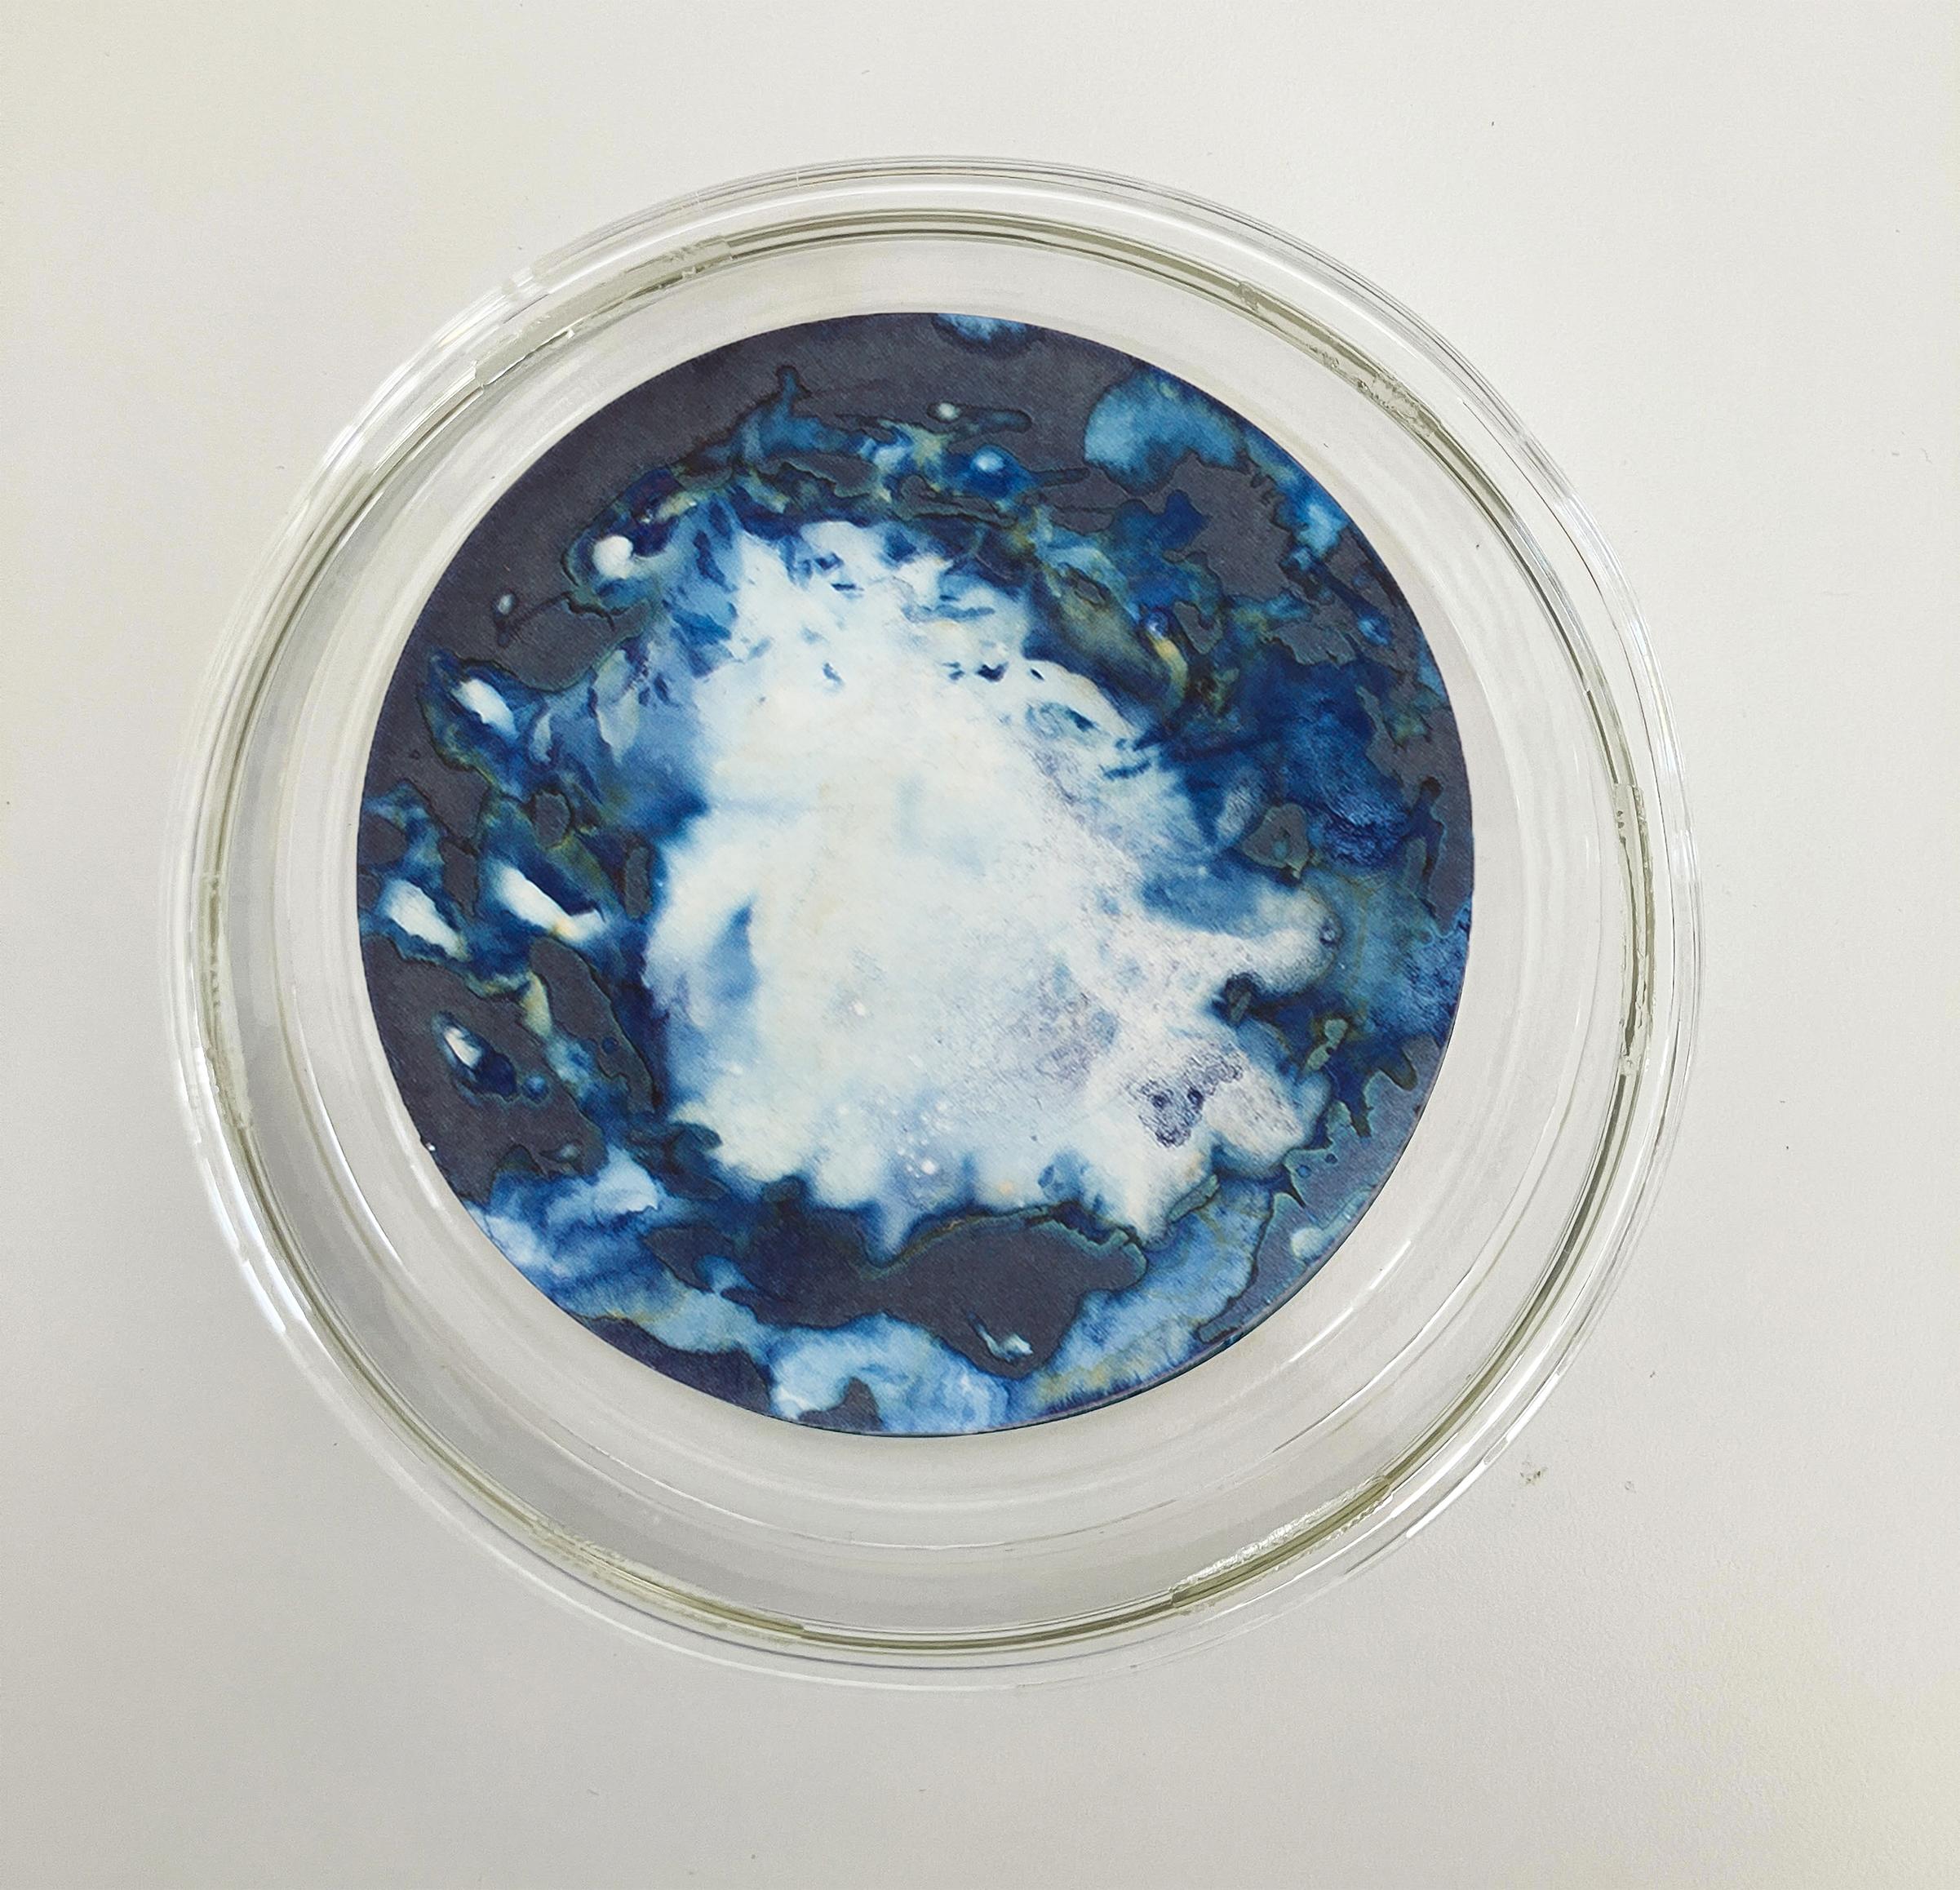 Algas 23, 63 y 64. Cyanotype photograhs mounted in high resistance glass dish For Sale 1